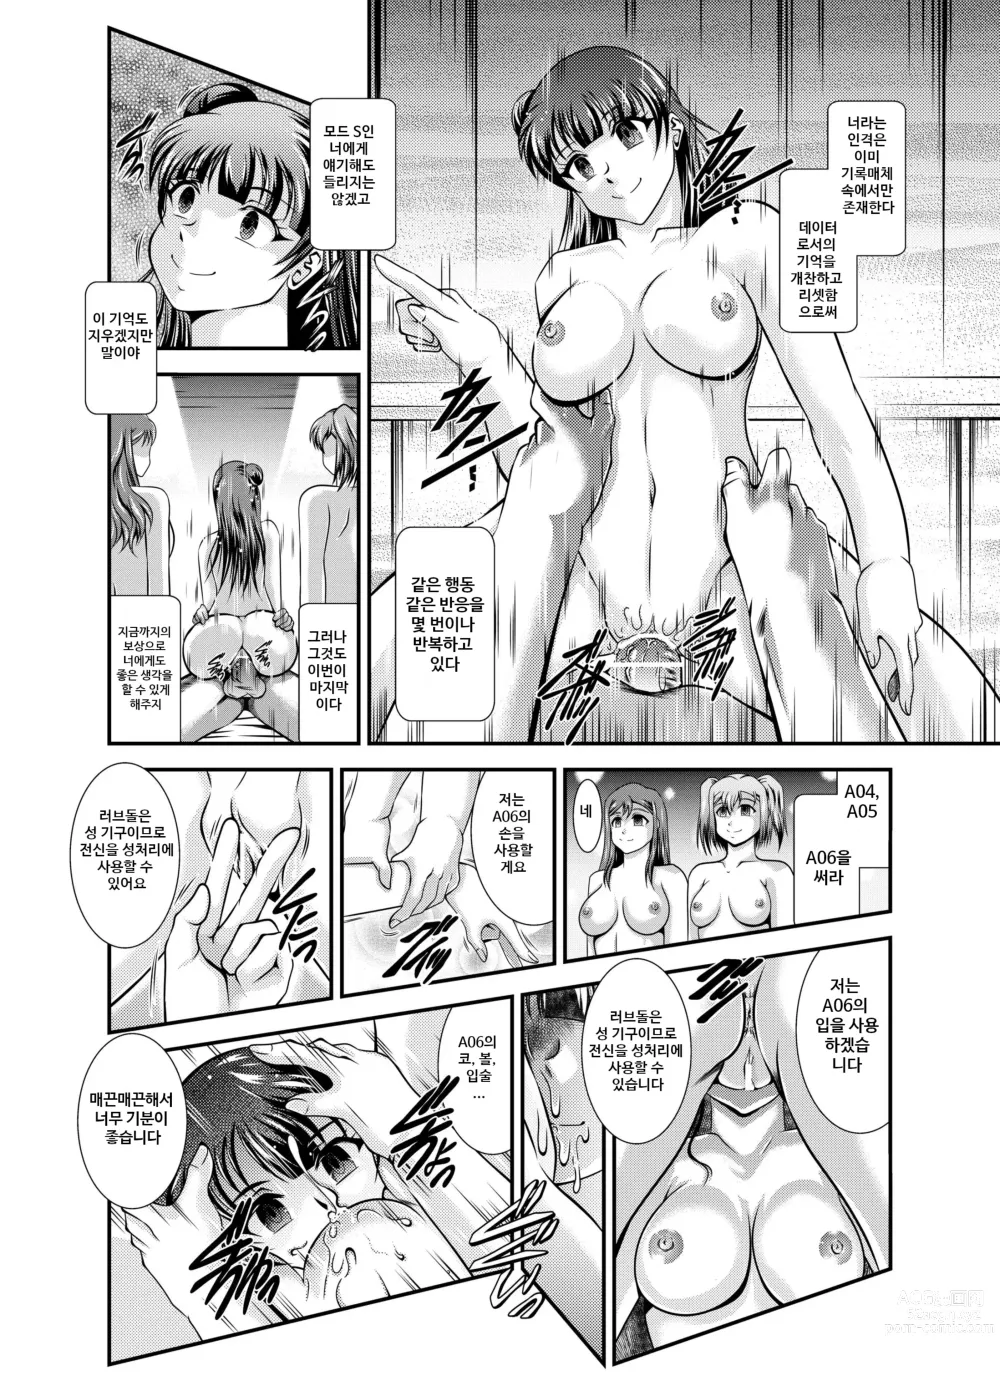 Page 105 of doujinshi ProjectAqours EP01-04